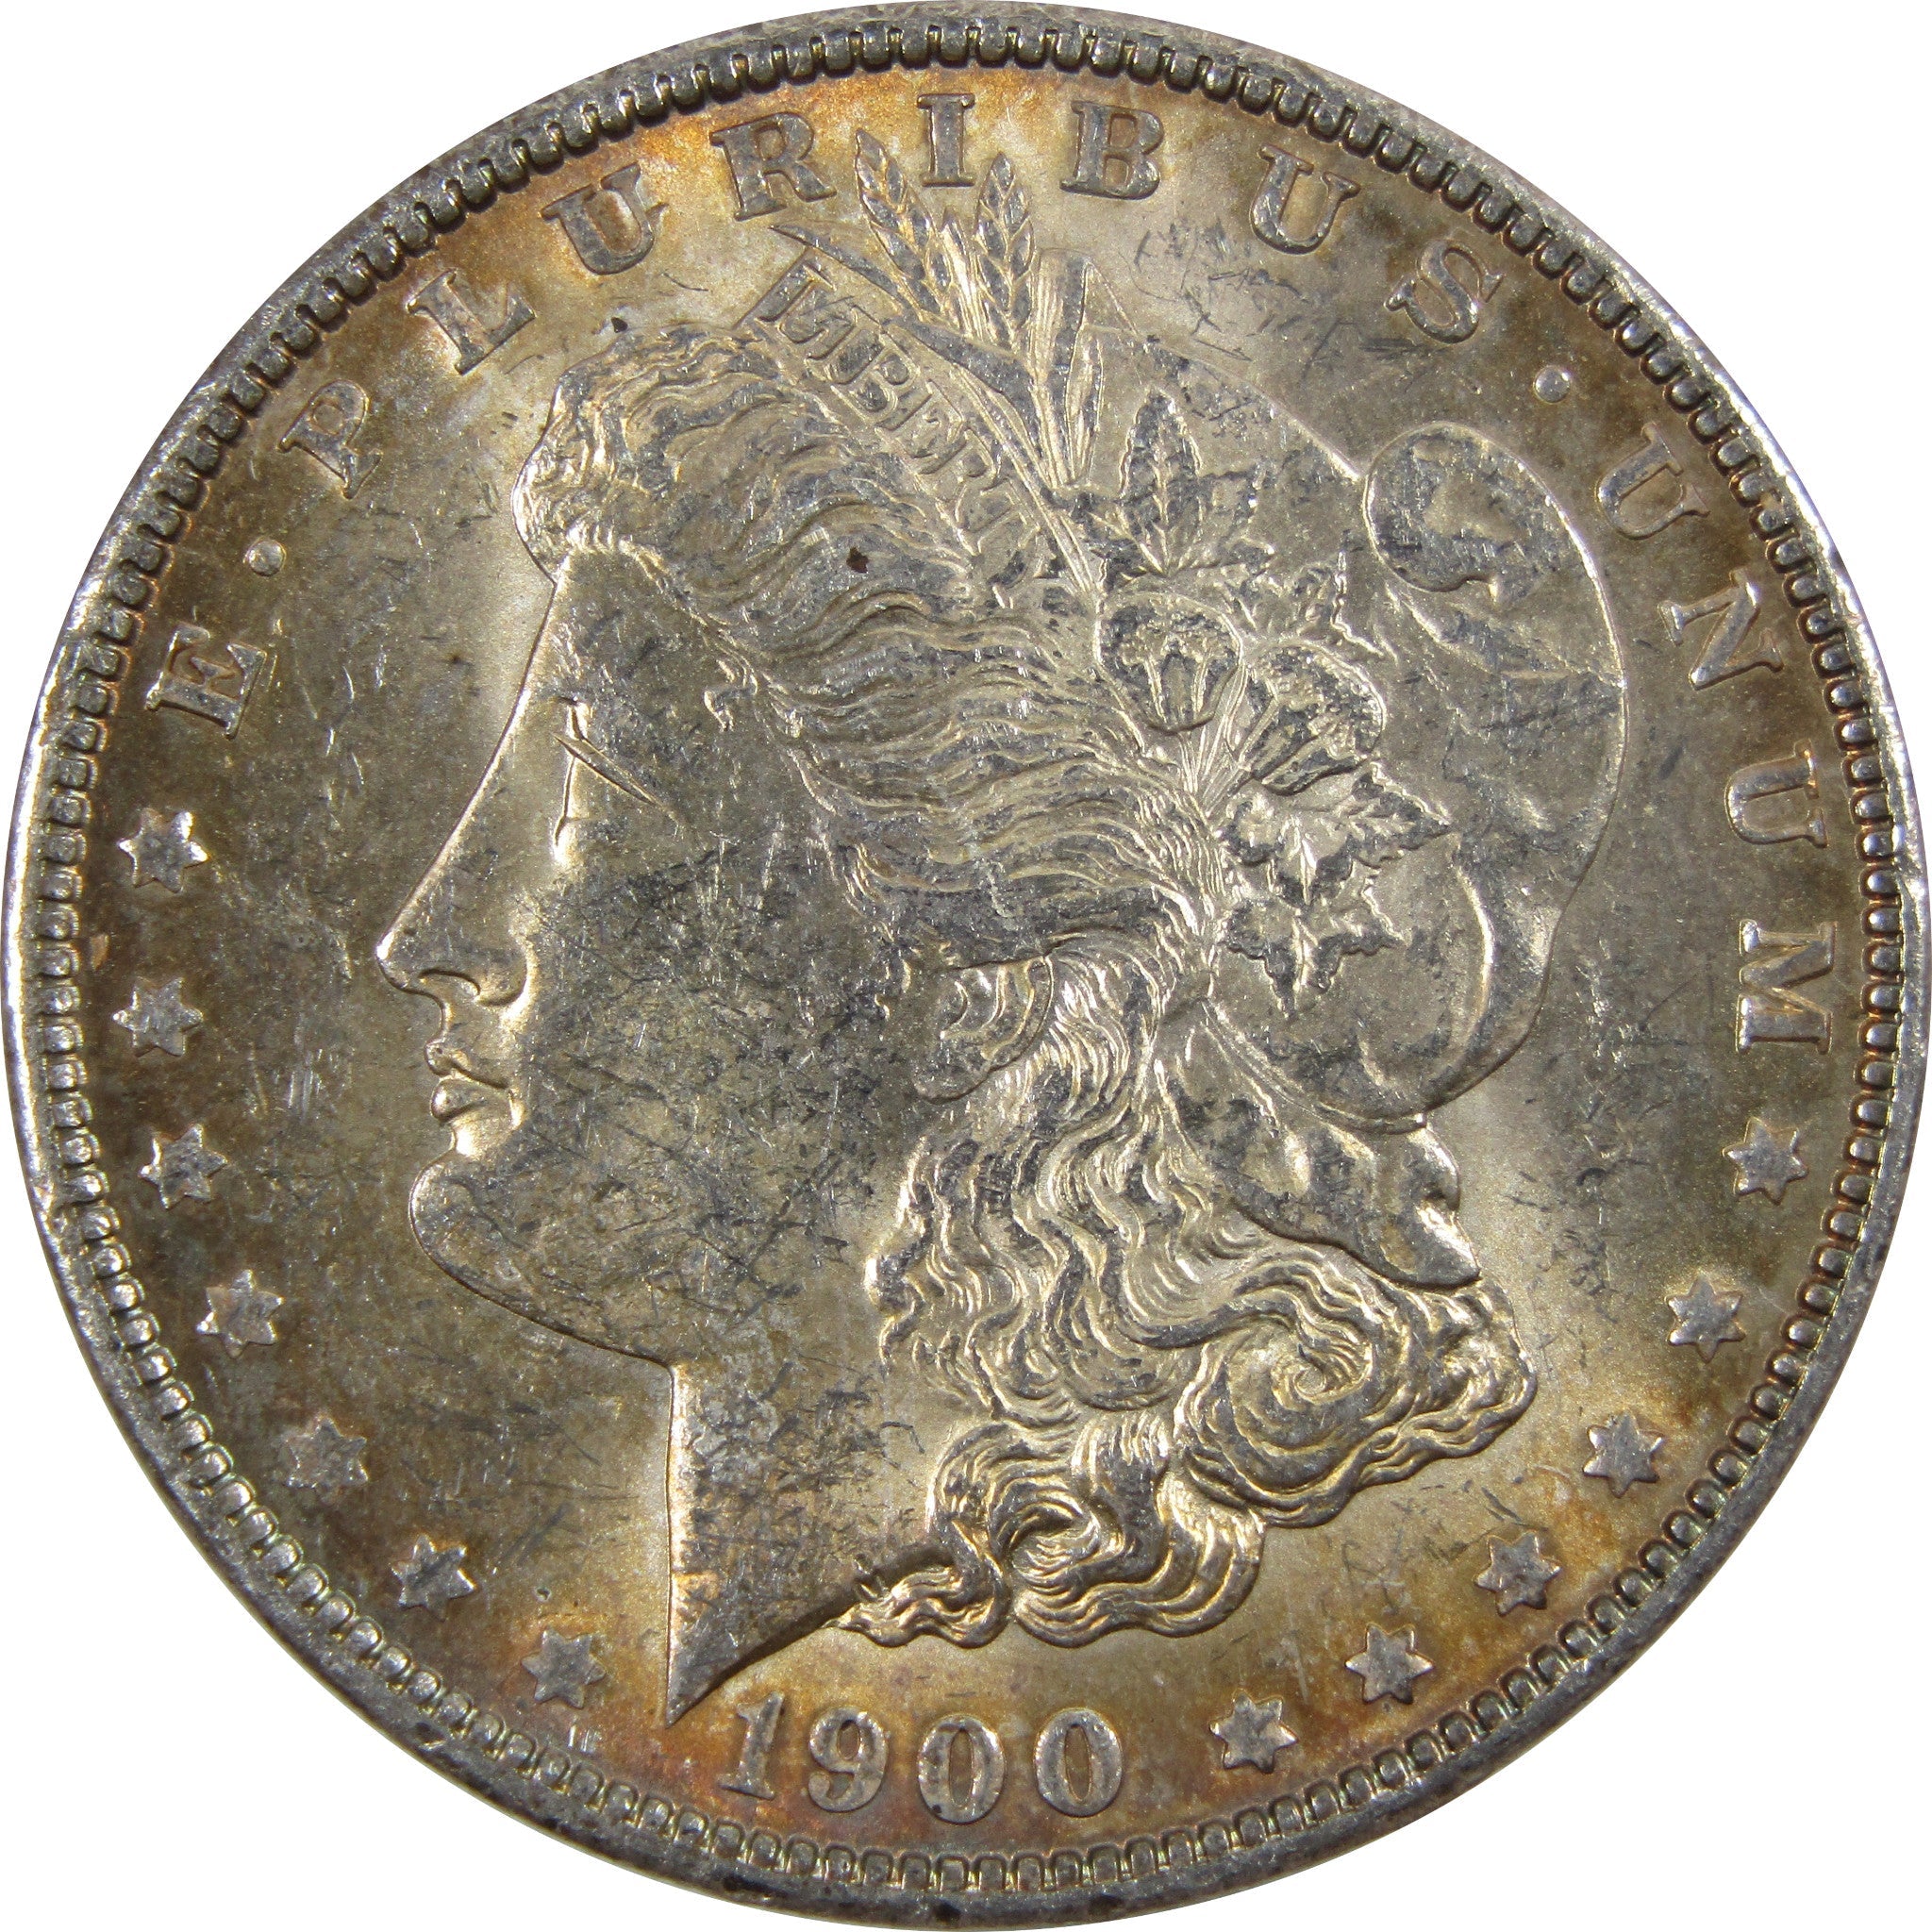 1900 Morgan Dollar AU About Uncirculated 90% Silver $1 Coin SKU:I5529 - Morgan coin - Morgan silver dollar - Morgan silver dollar for sale - Profile Coins &amp; Collectibles